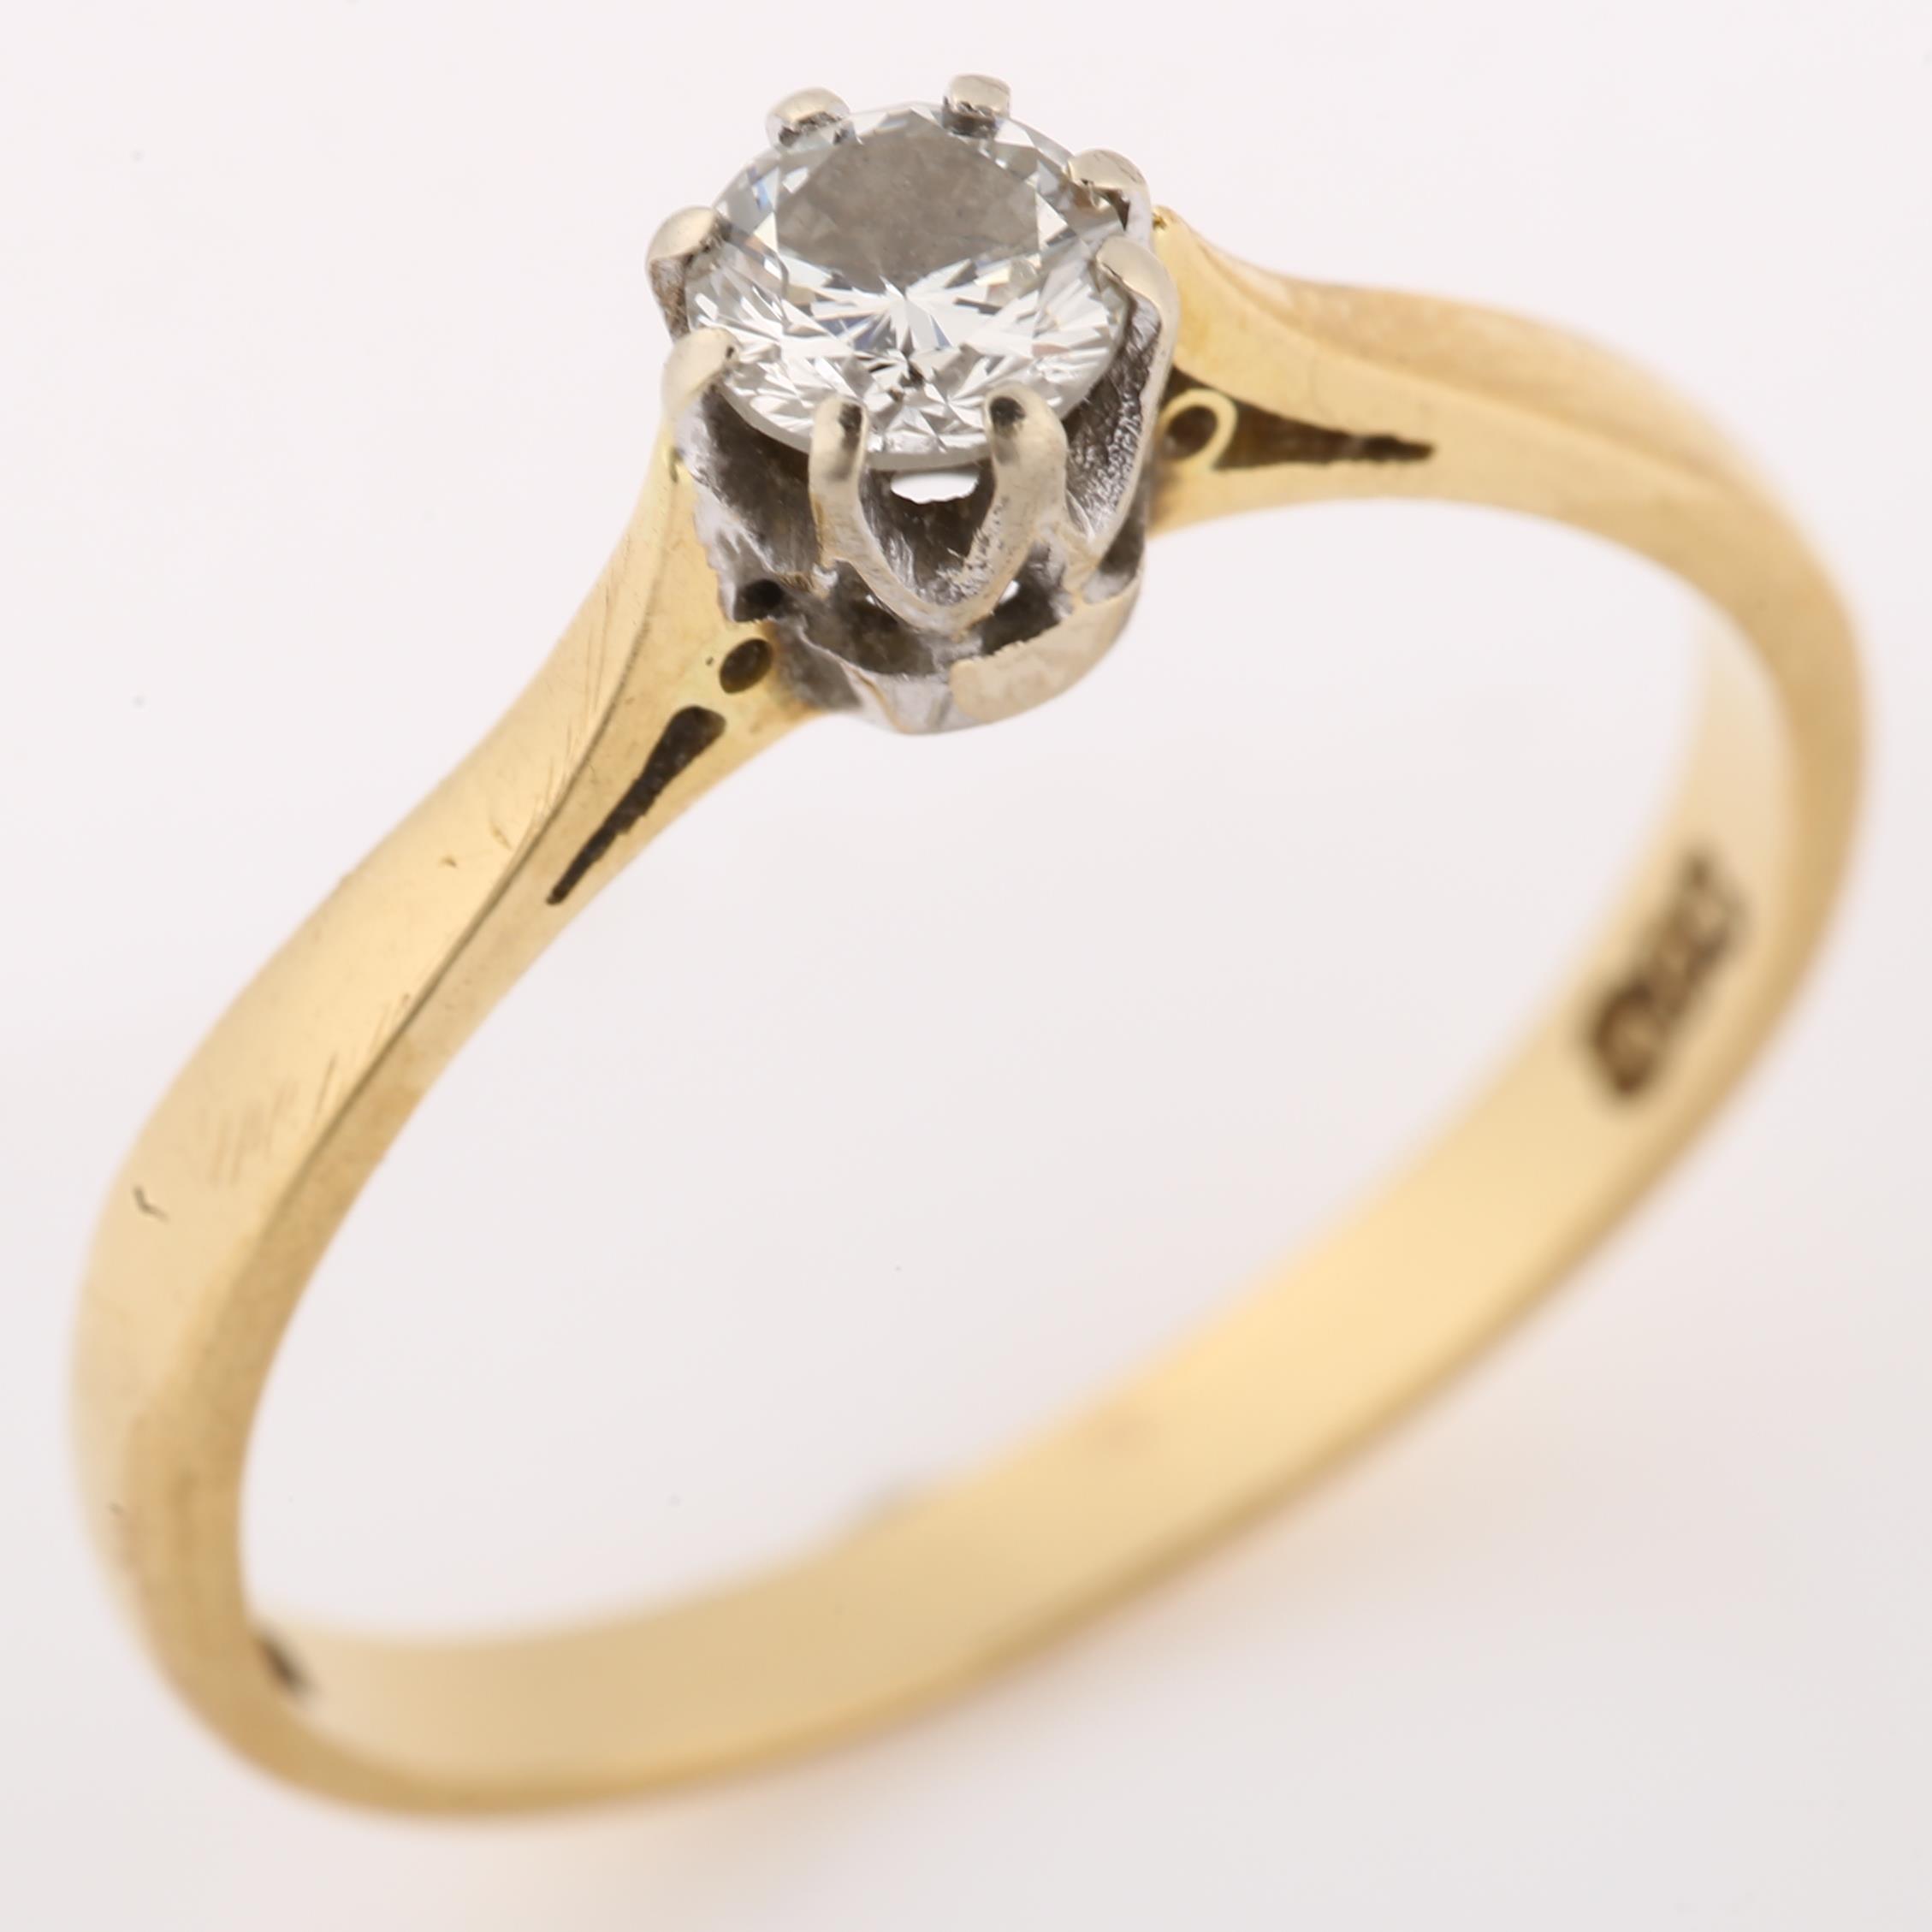 An 18ct gold 0.3ct solitaire diamond ring, claw set with modern round brilliant-cut diamond, - Image 2 of 4